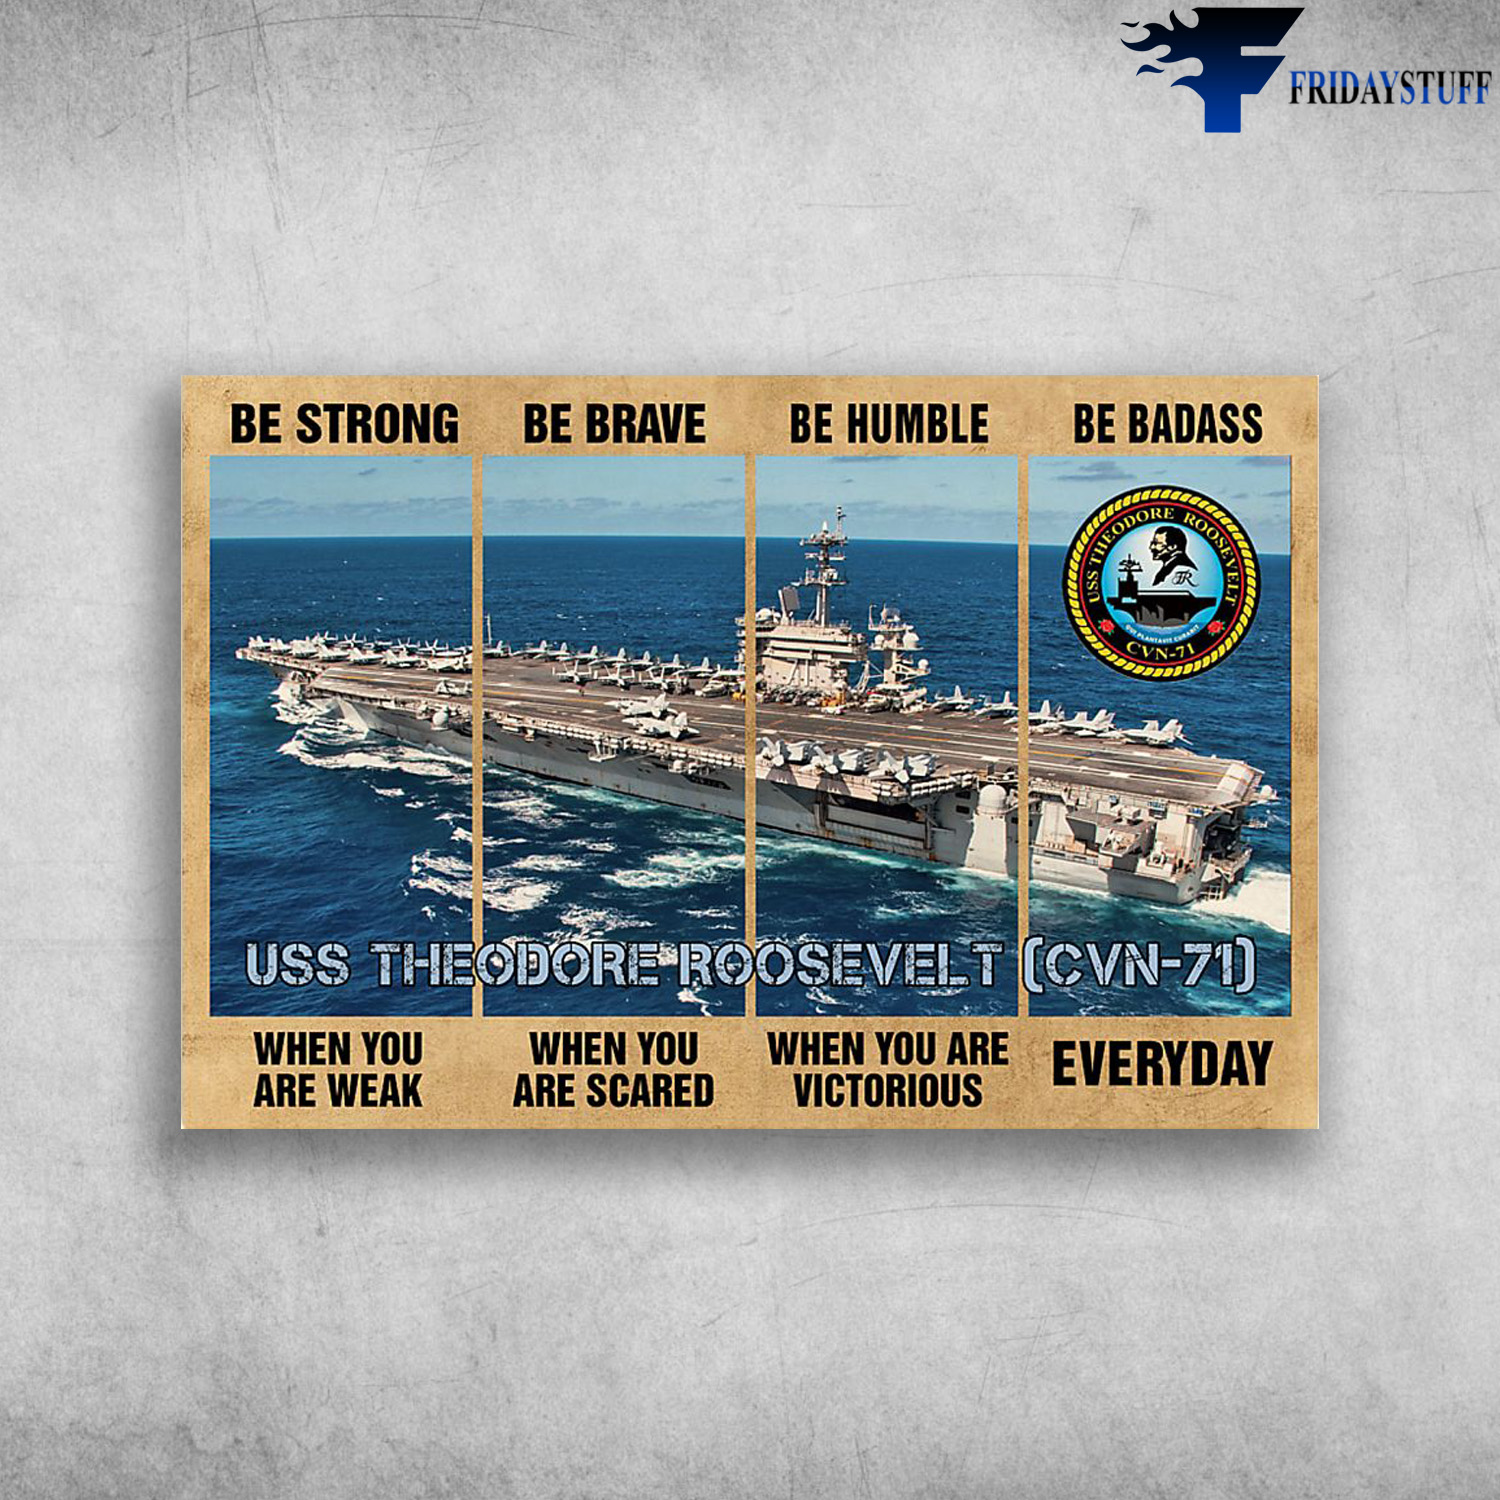 Navy Ship - Be Strong When You Are Weak, Be Brave When You Are Scared, Be Humble When You Are Victorious, Be Badass Everyday, USS Theodore Roosevelt CVN-71